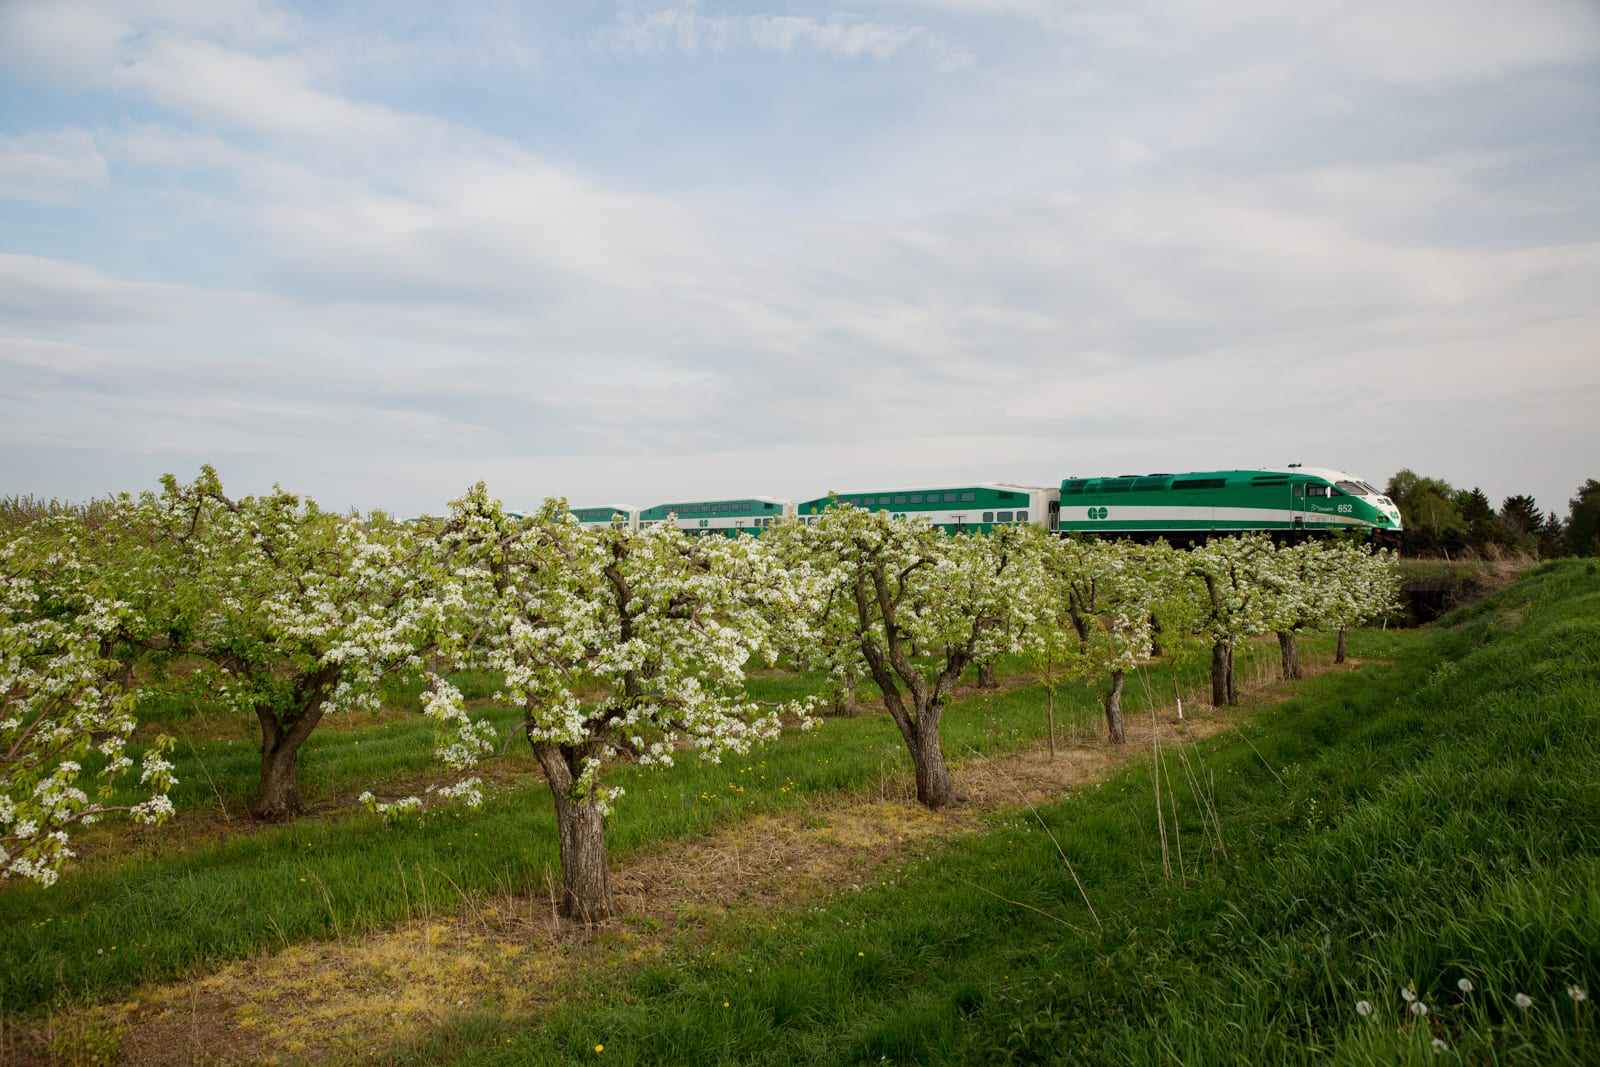 A GO train travels past apple trees in bloom.